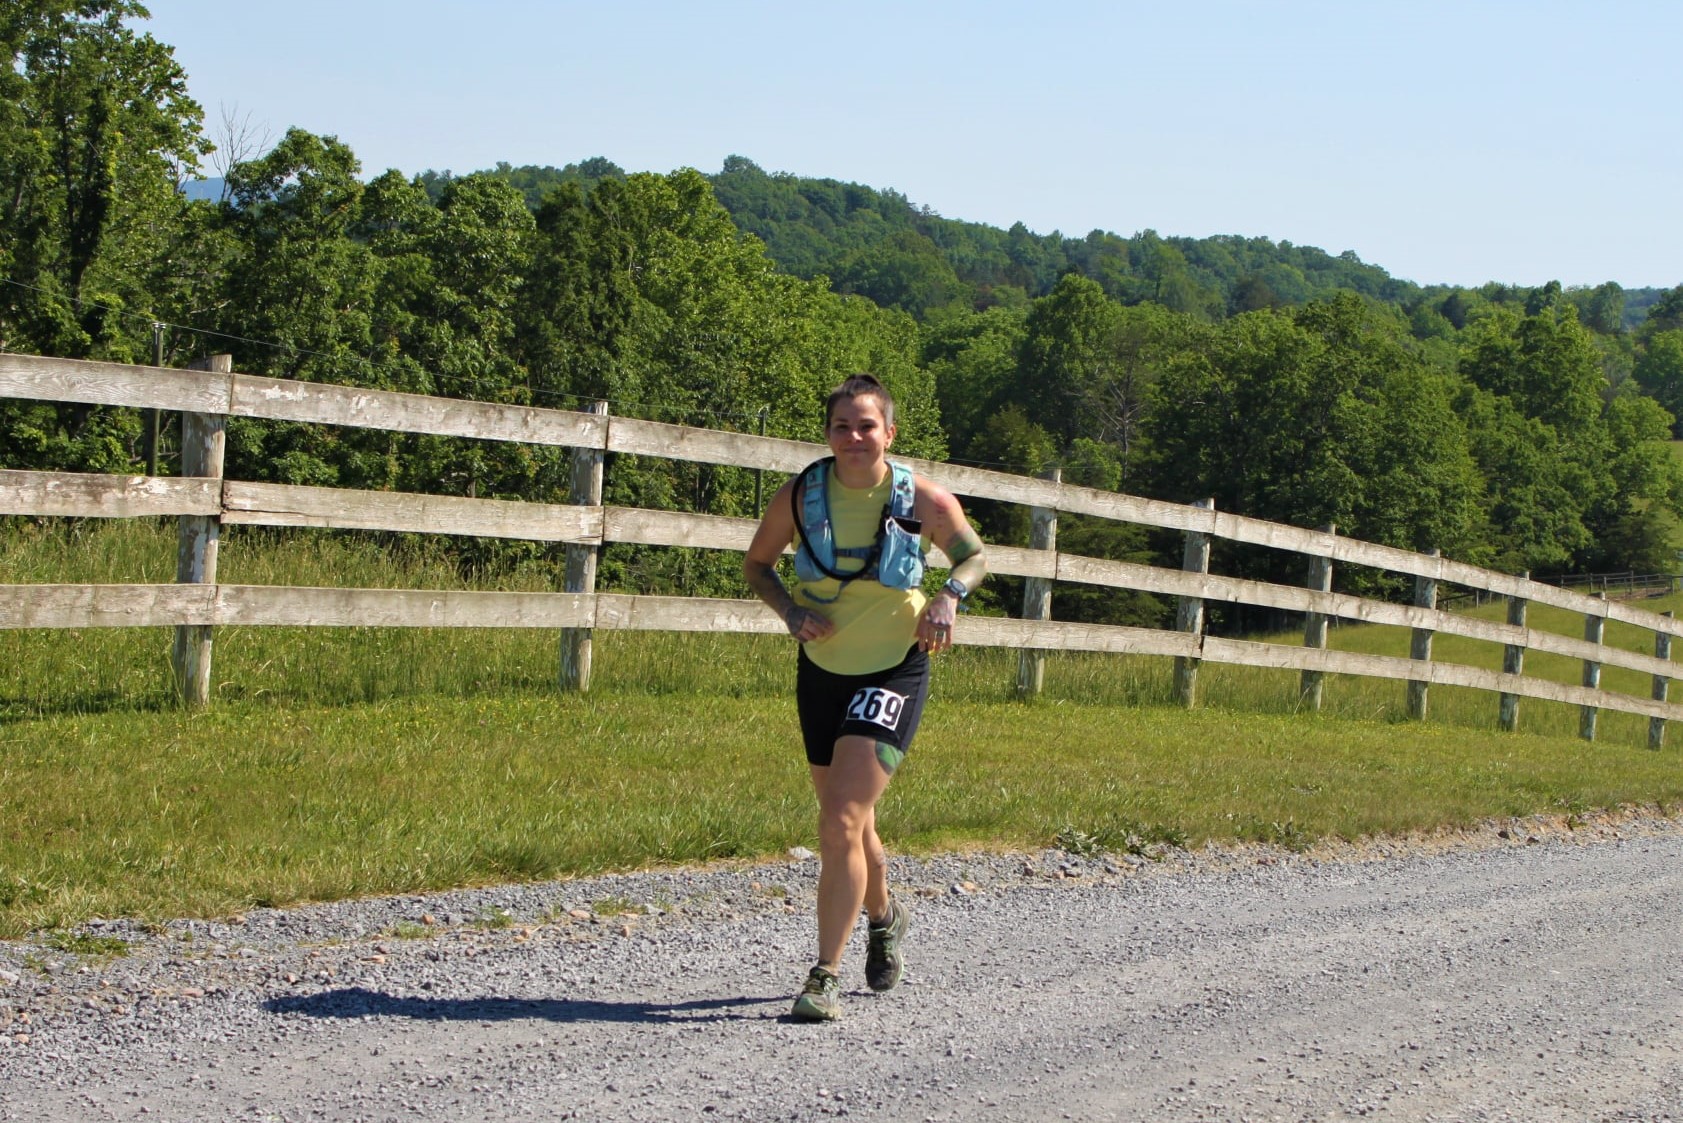 Gina running on a gravel portion of the course.